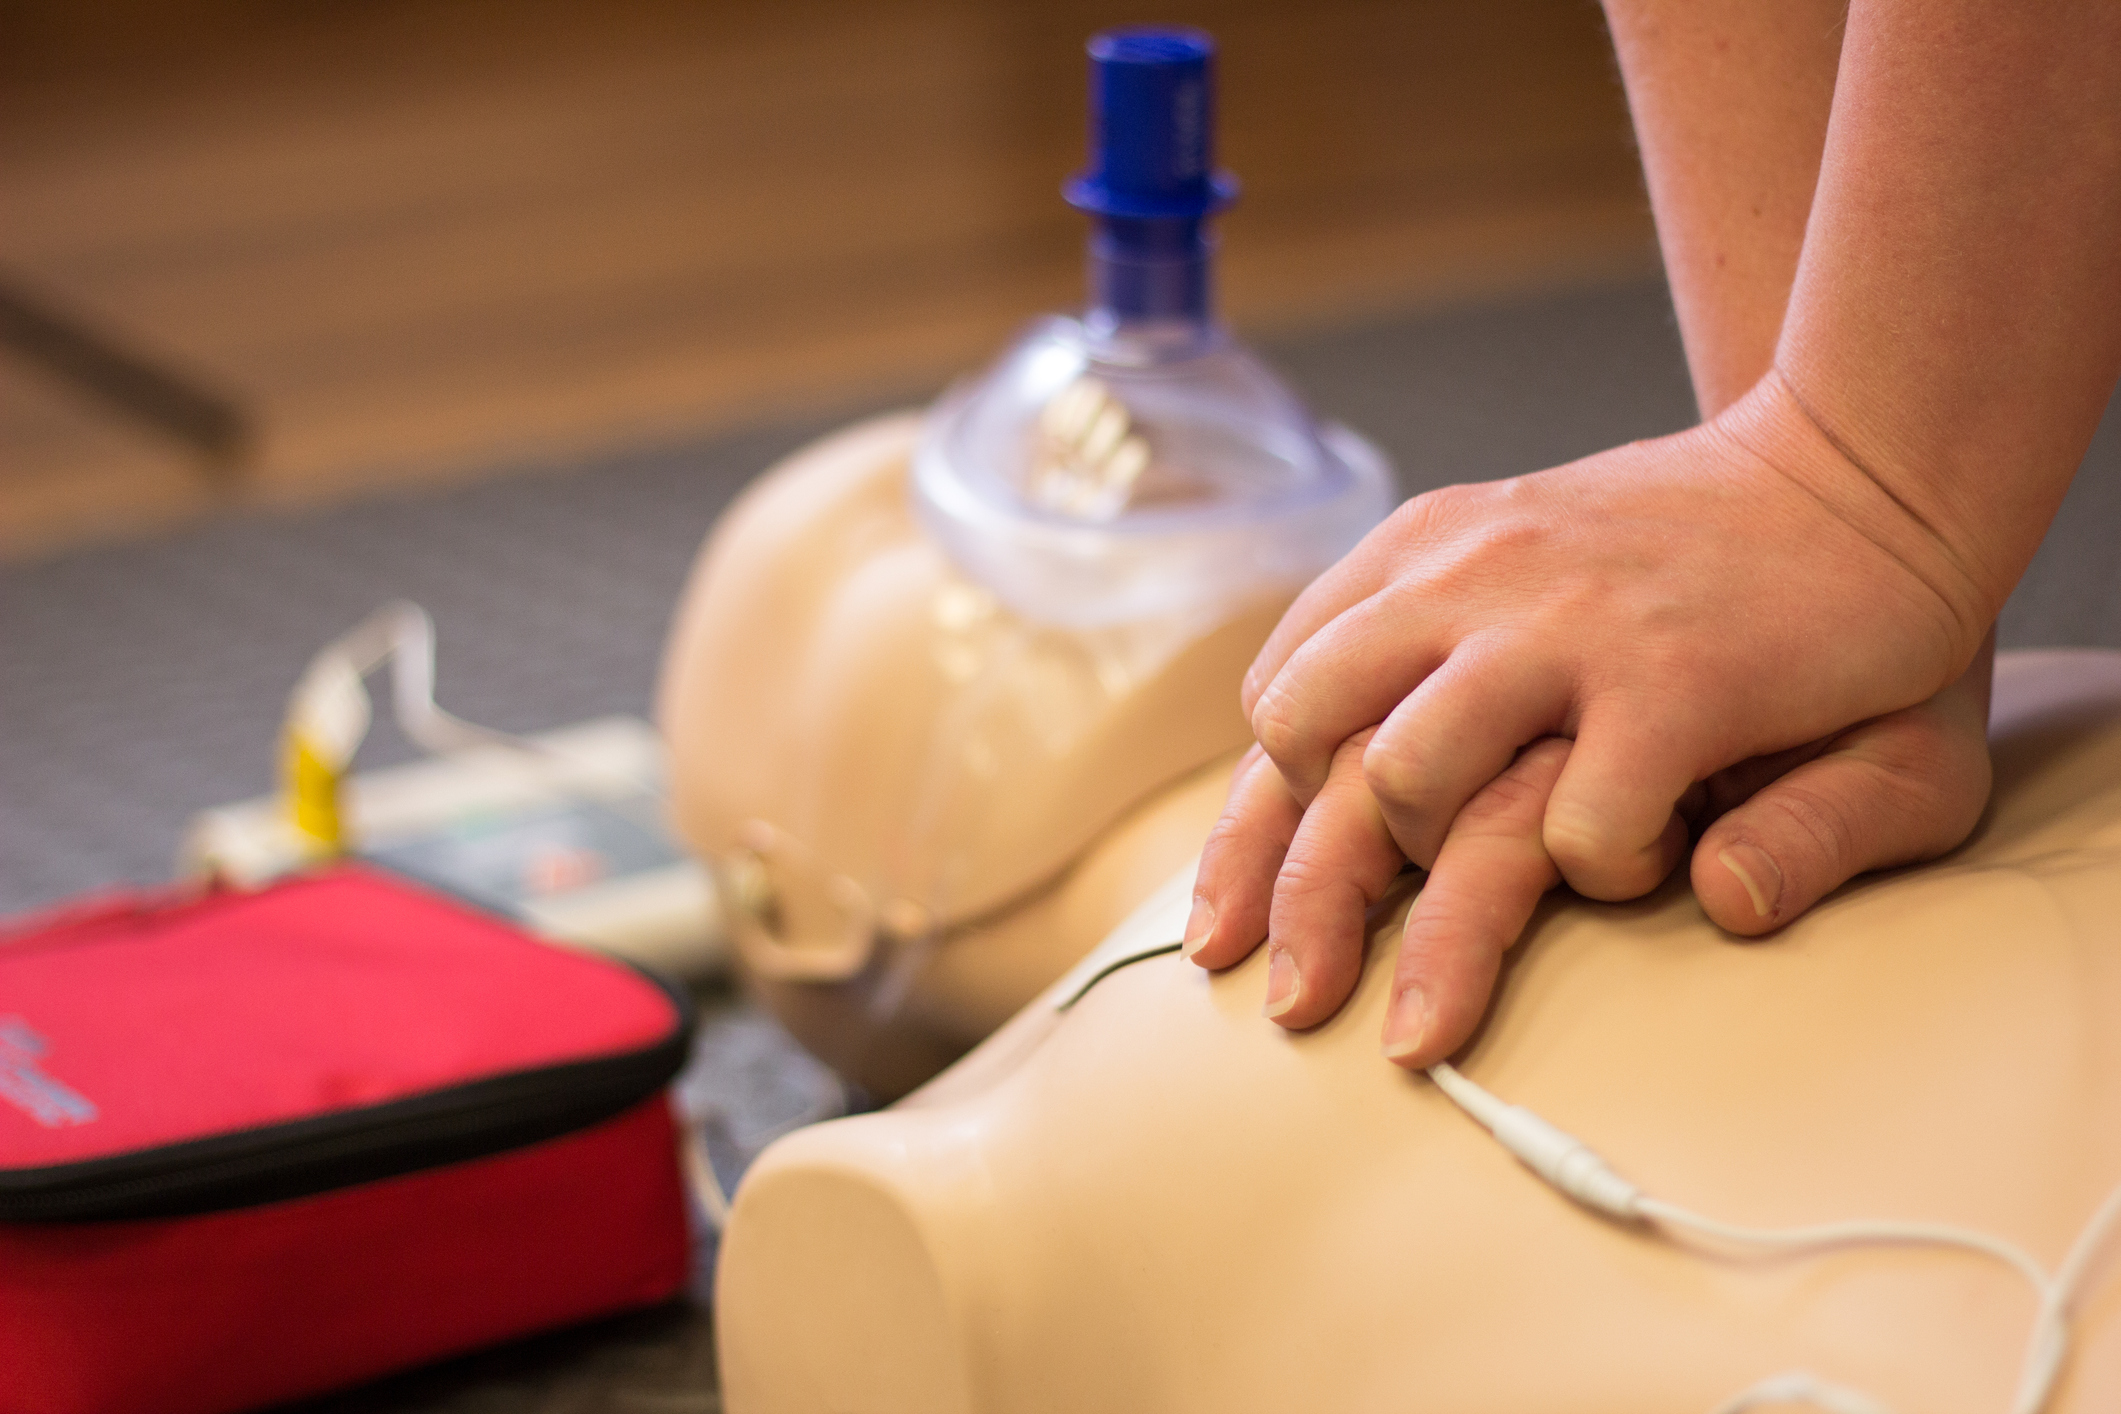 Picture of hands performing chest compressions on a mannequin